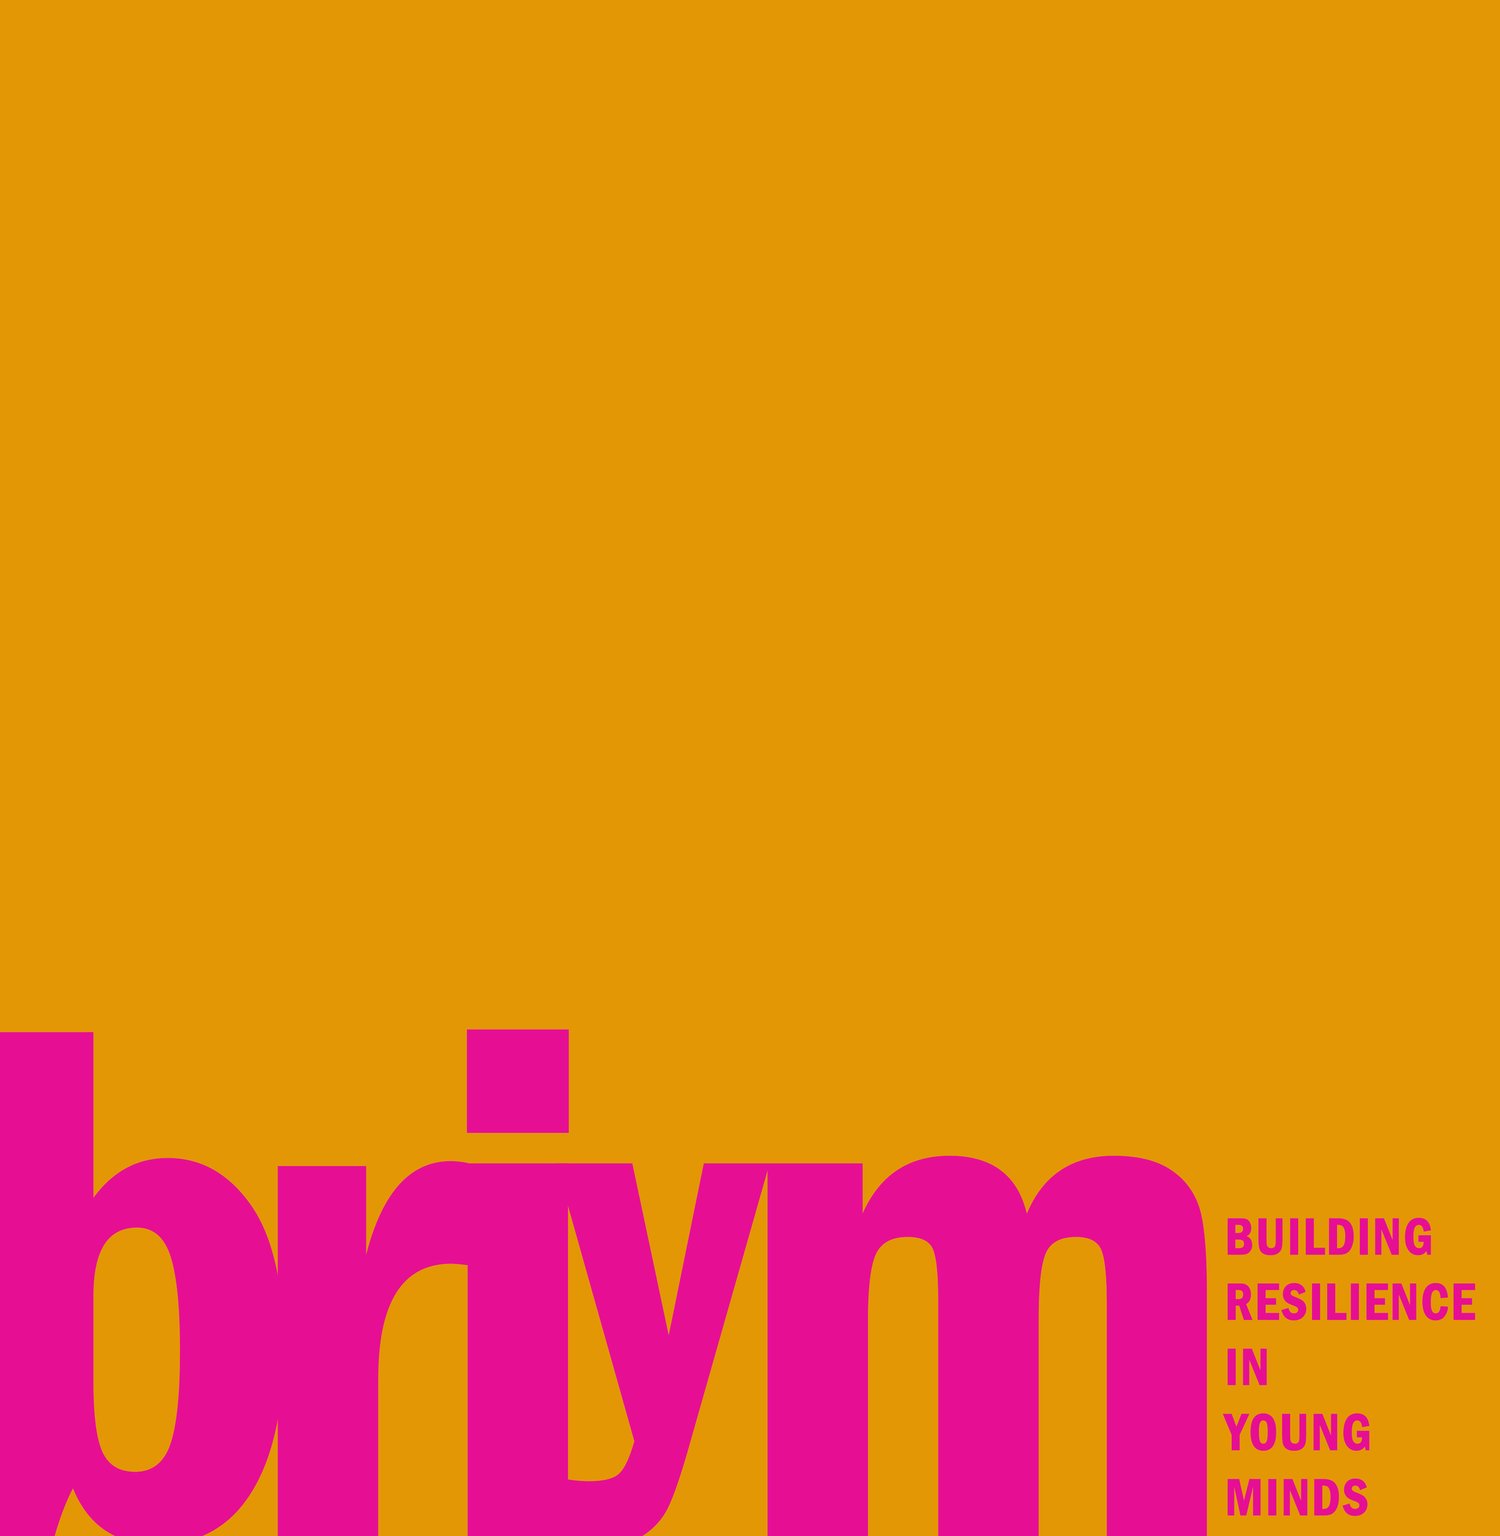 briym - Building Resilience in Young Minds